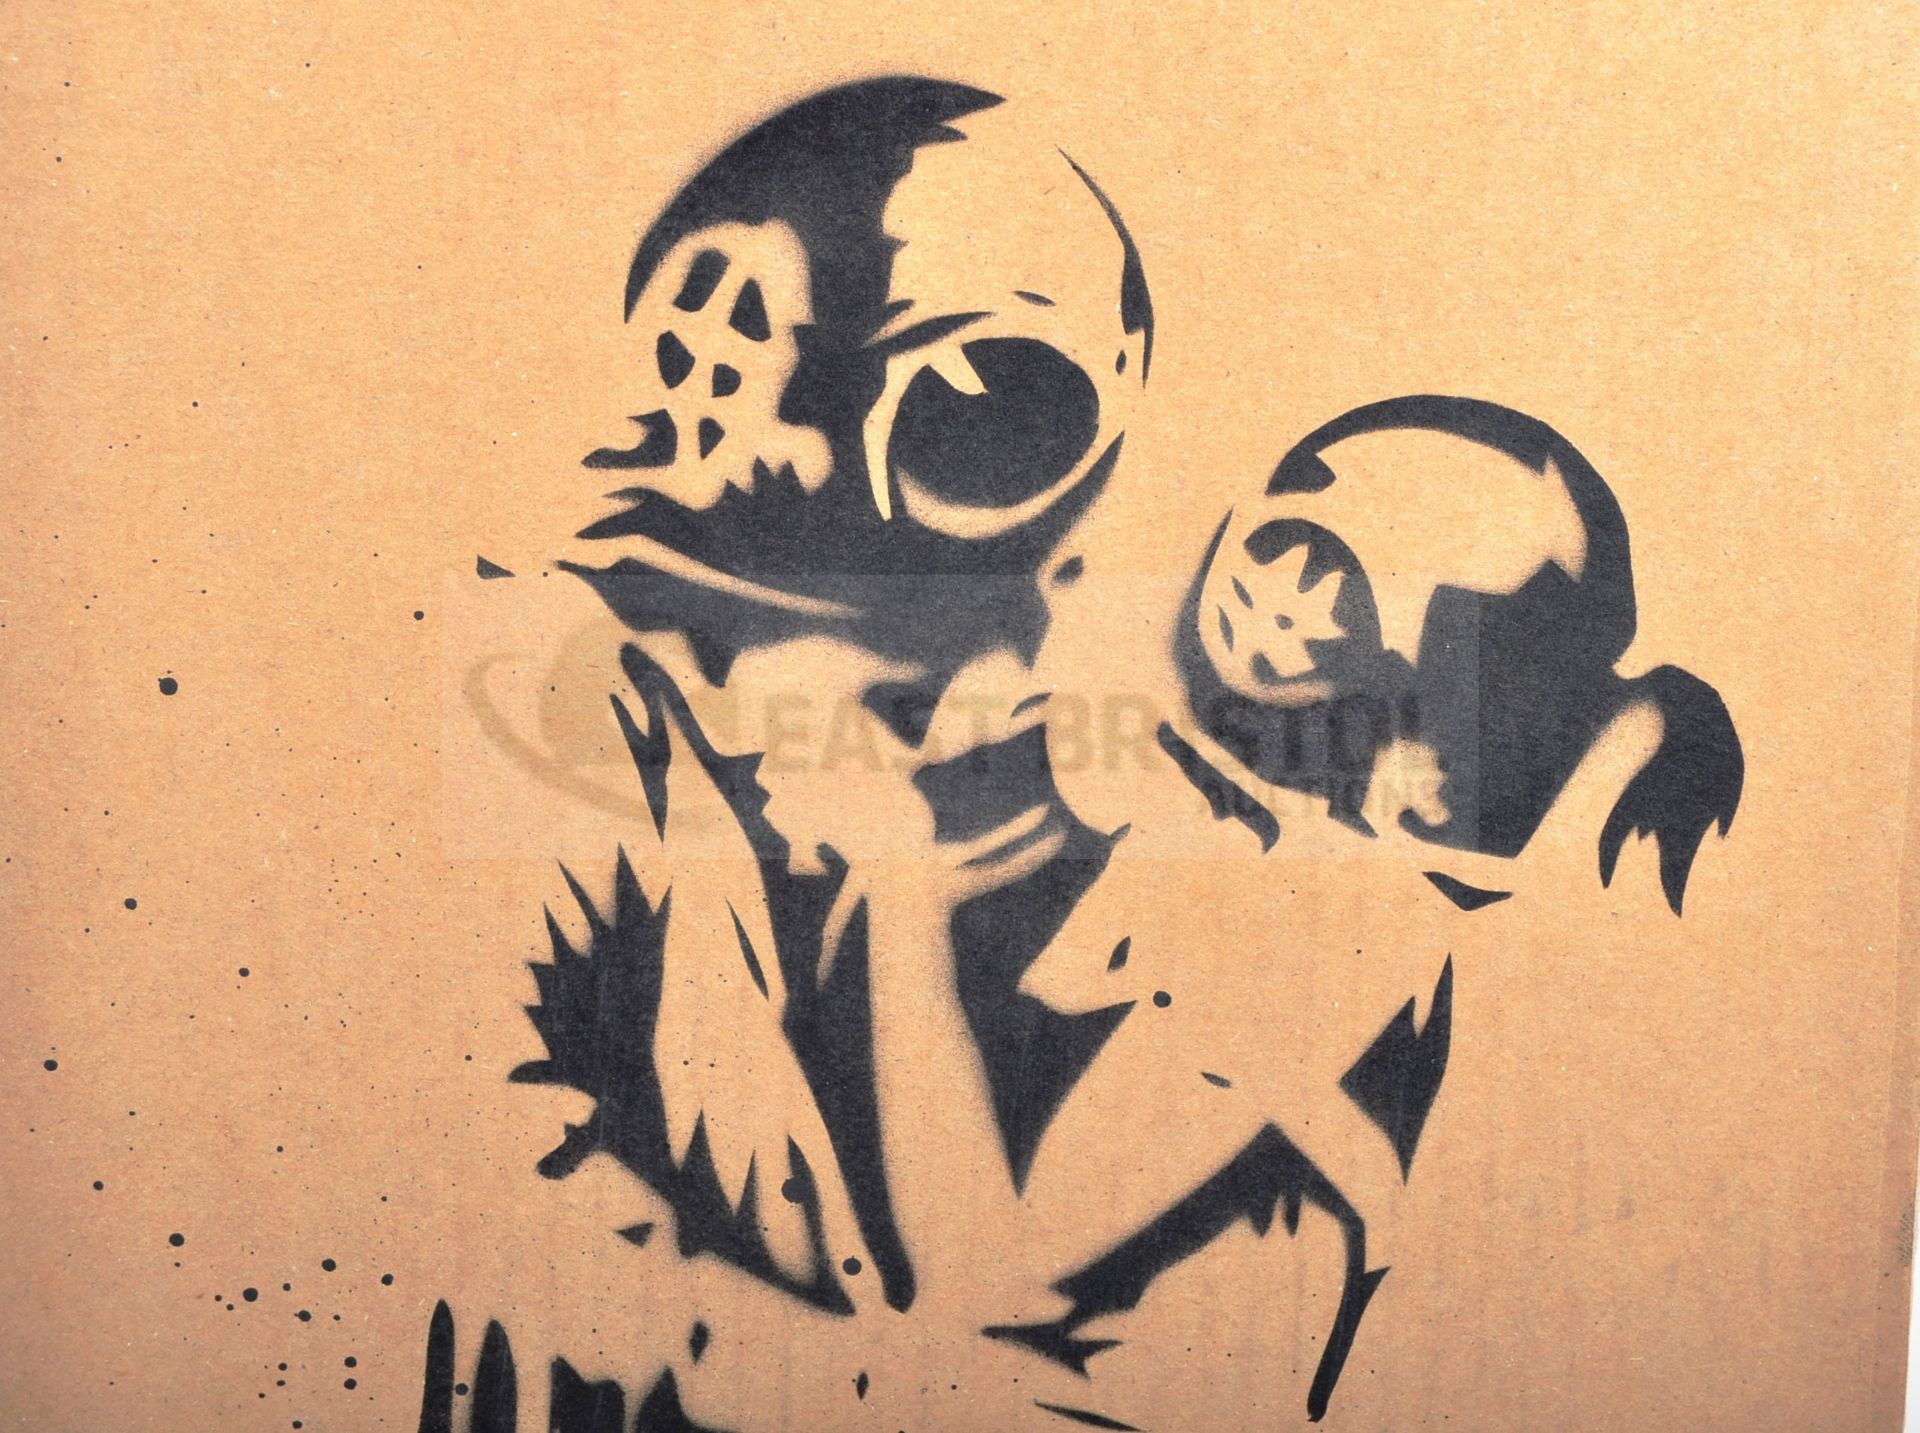 BANKSY - DISMALAND 2015 - DIVER LOVERS - Image 3 of 4